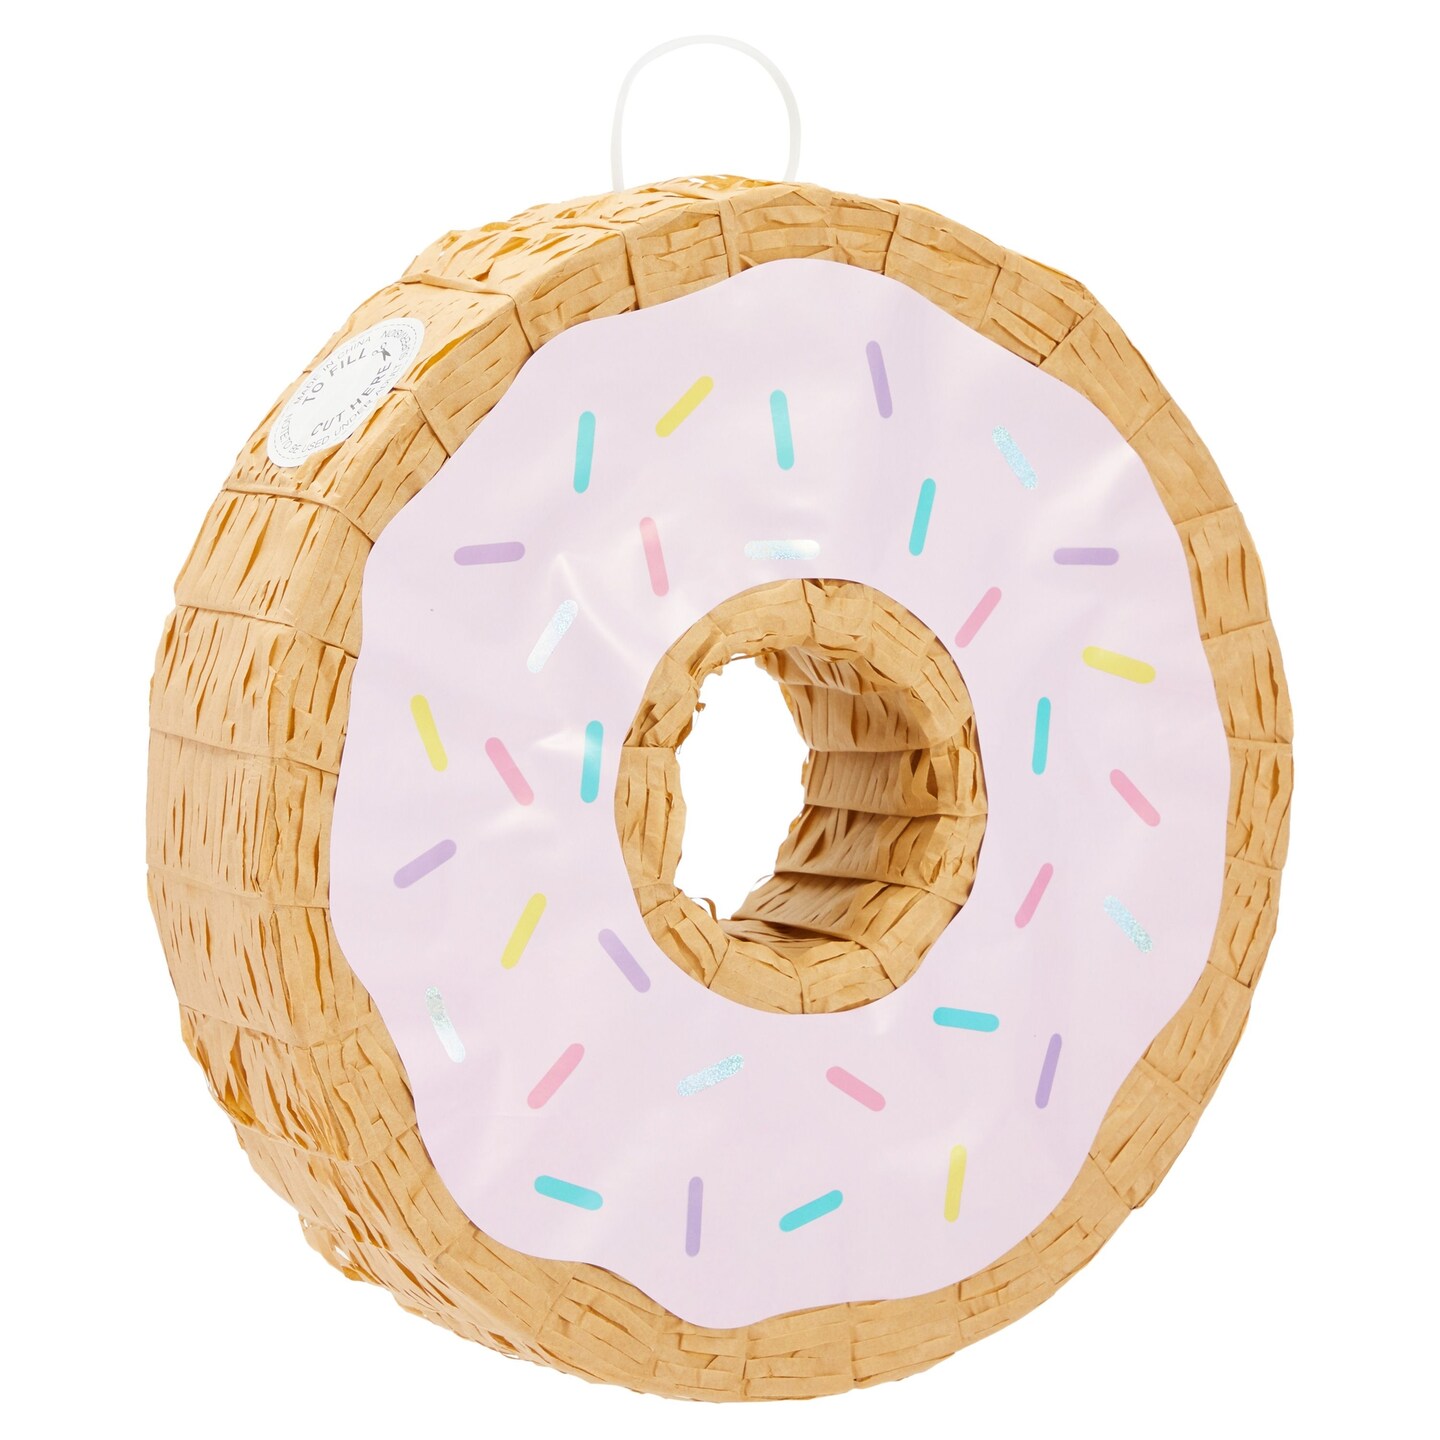 Small Pink Donut Pinata for Two Sweet Birthday Party Decorations, Baby Shower, Donut Grow Up Theme (13 x 3 In)